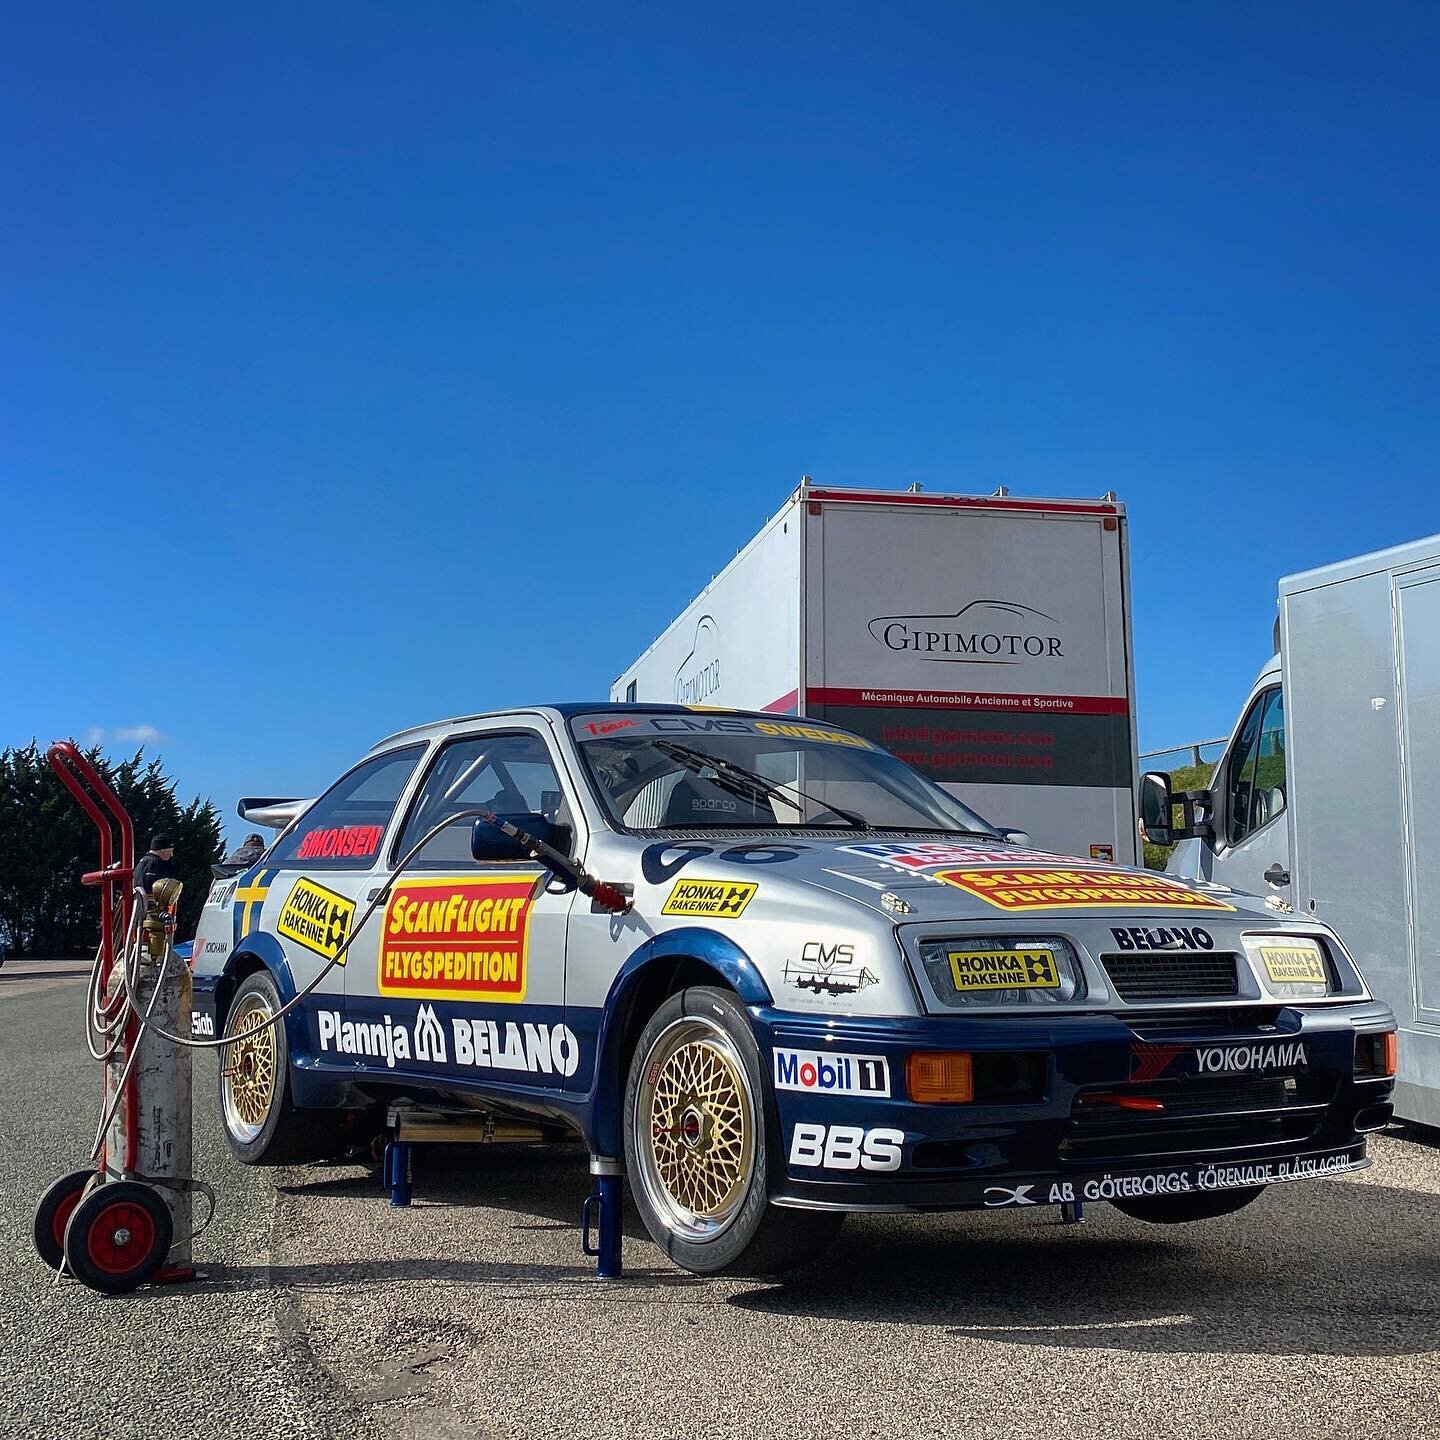 First shakedown of the CMS Team Sweden Ford Sierra RS500 group A with @gipimotor.

Awesome car to drive 👌

#ford #fordsierra #fordsierrarscosworth #fordsierracosworth #fordsierrars500 #fordsierrars500cosworth #cmsteamsweden